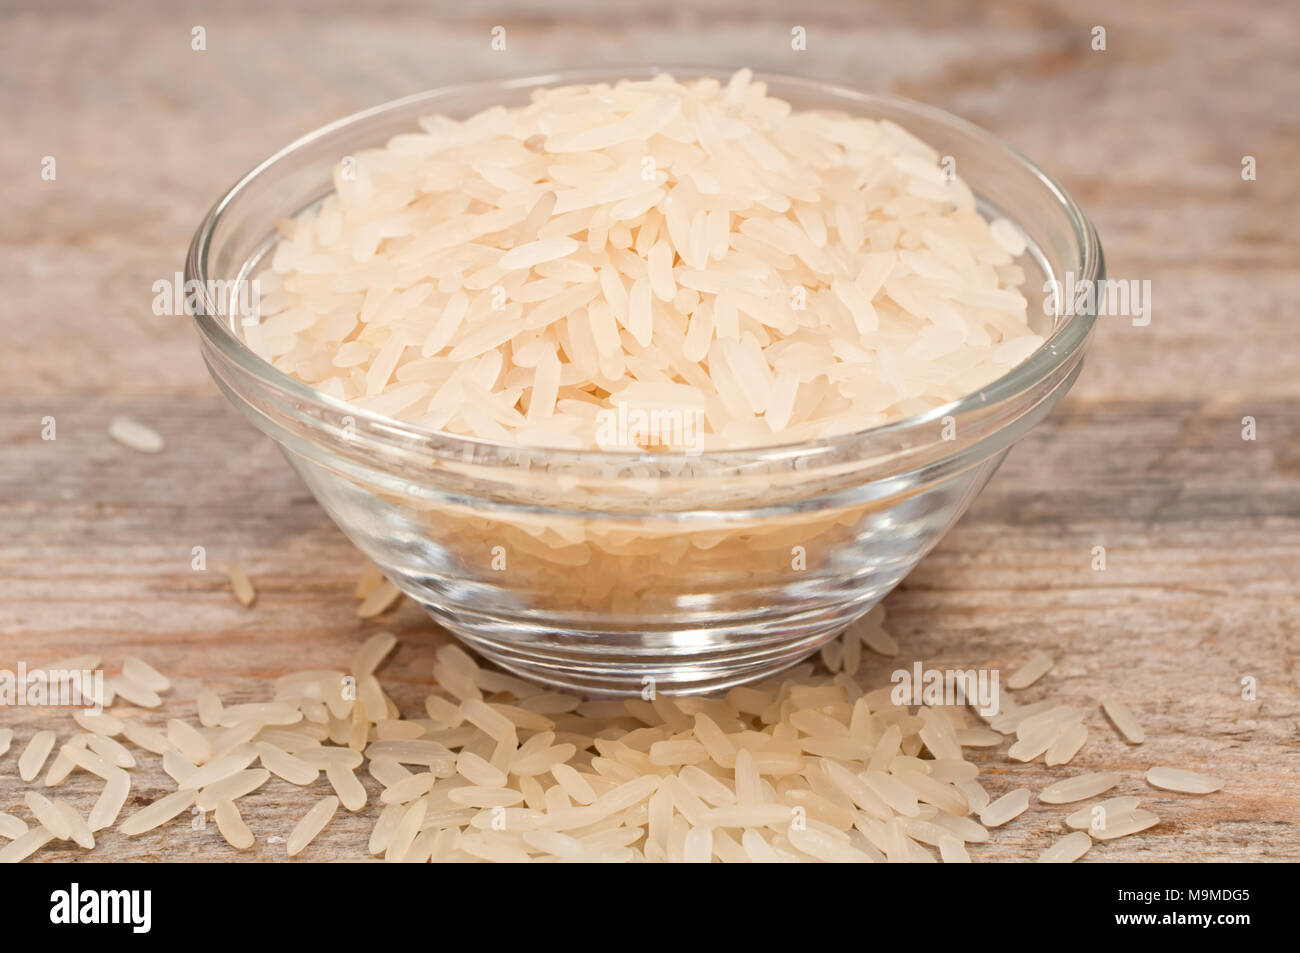 rice cereal in a glass plate on wooden table  Stock Photo